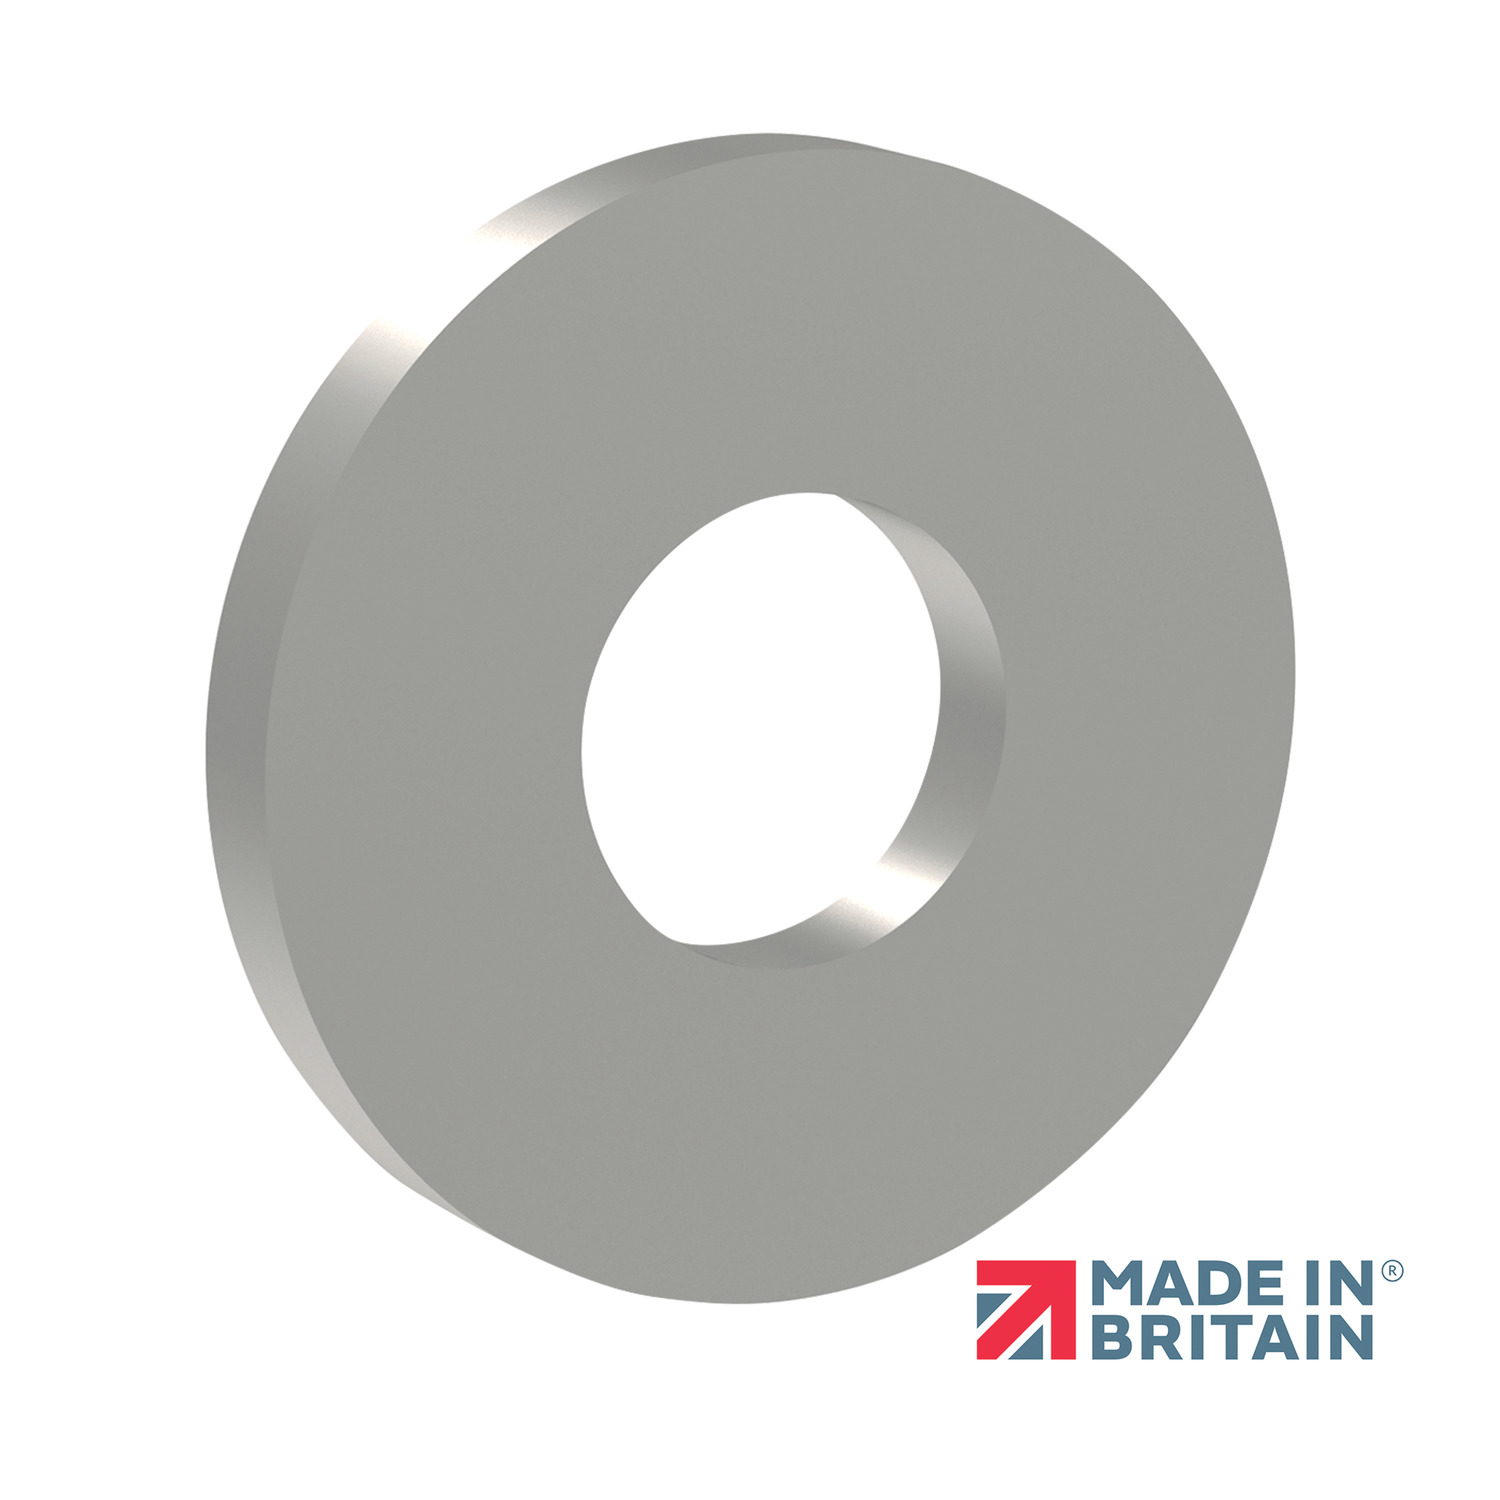 Product P0168, Threaded Captive Washers for captive screws / 